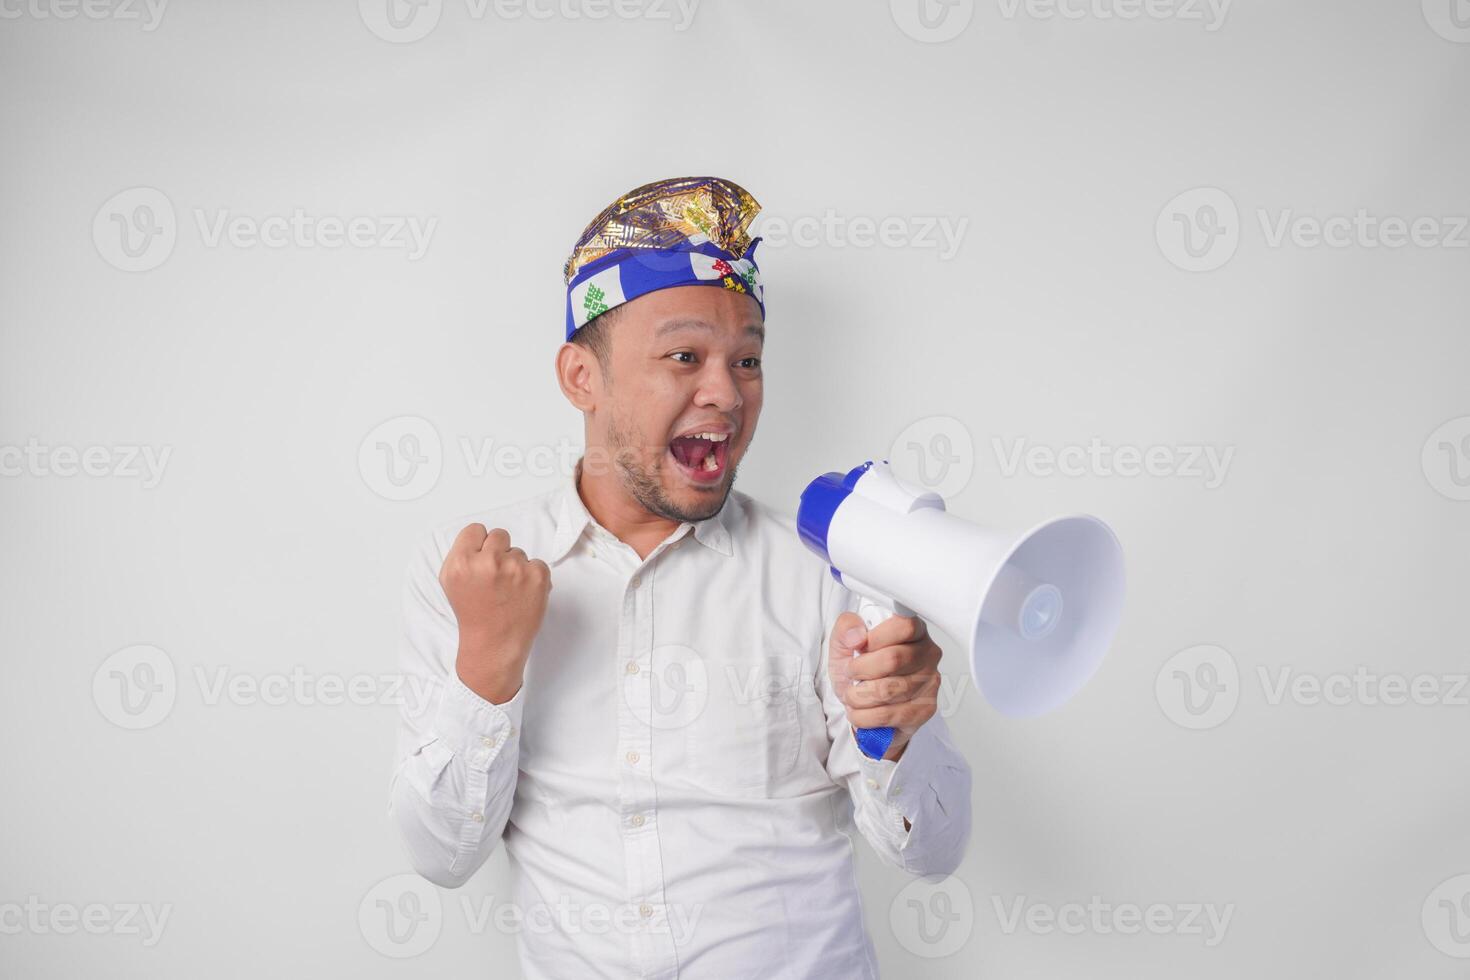 Overjoyed Balinese man in white shirt and traditional headdress shouting at megaphone feeling excited, isolated by white background photo